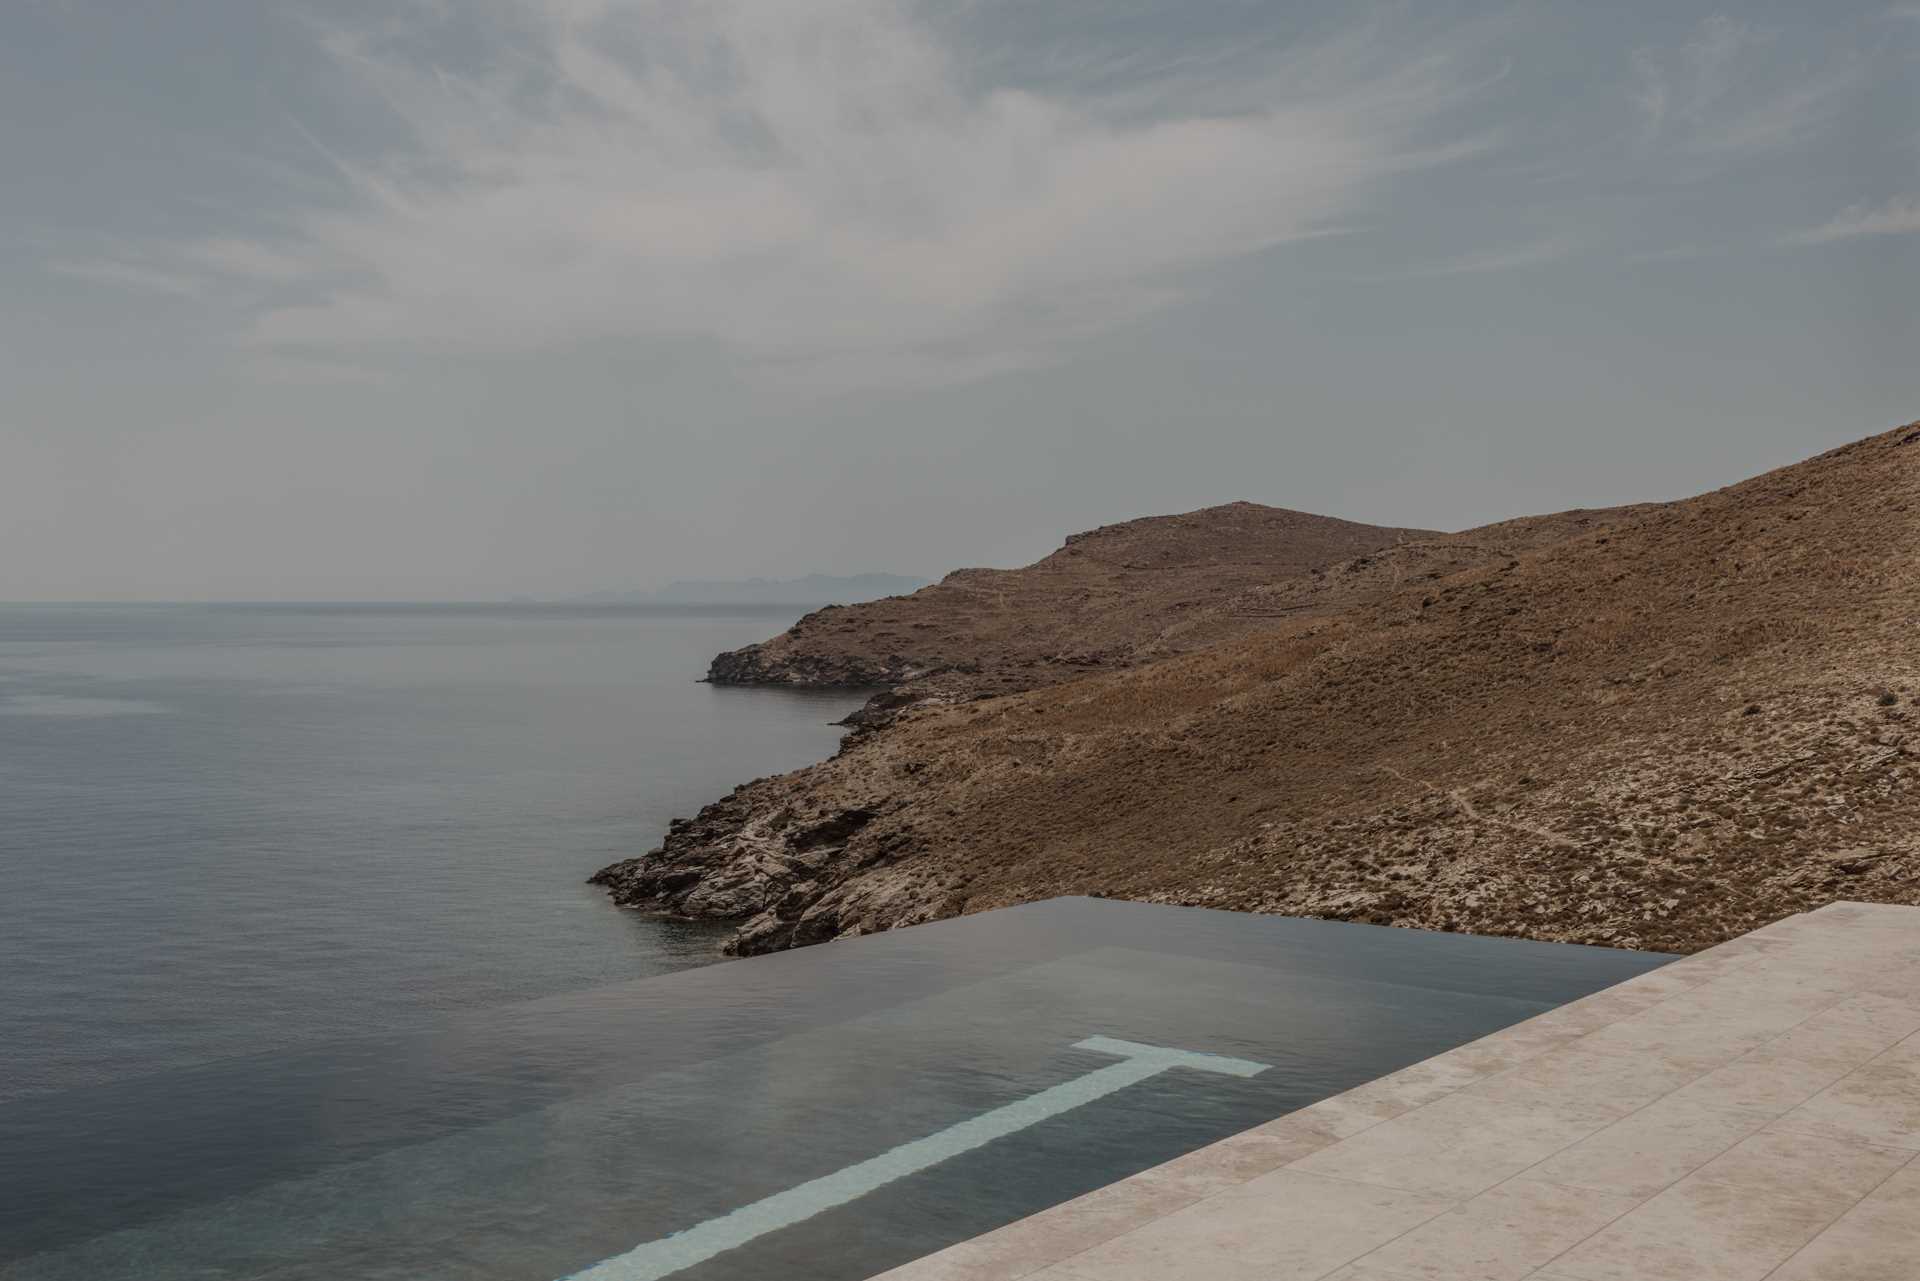 A swimming pool with an infinity edge provides a place to cool off with uninterrupted views of the Mediterranean Sea.